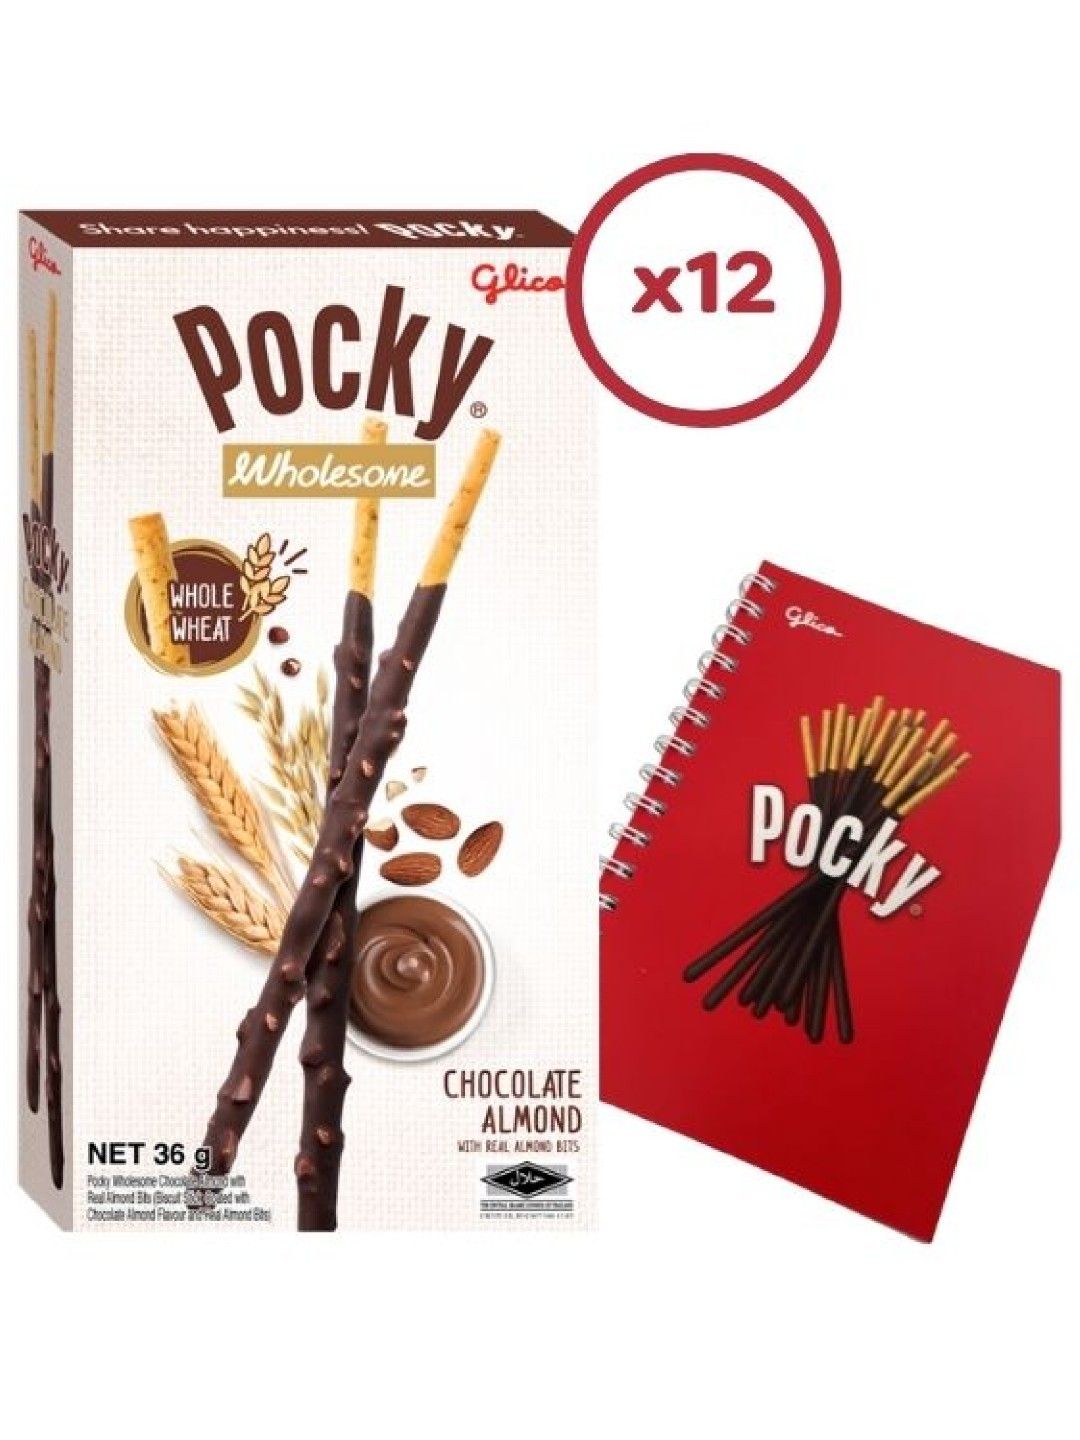 Pocky Wholesome Chocolate Almonds Sticks (Bundle of 12) with FREE Glico Notebook (No Color- Image 1)